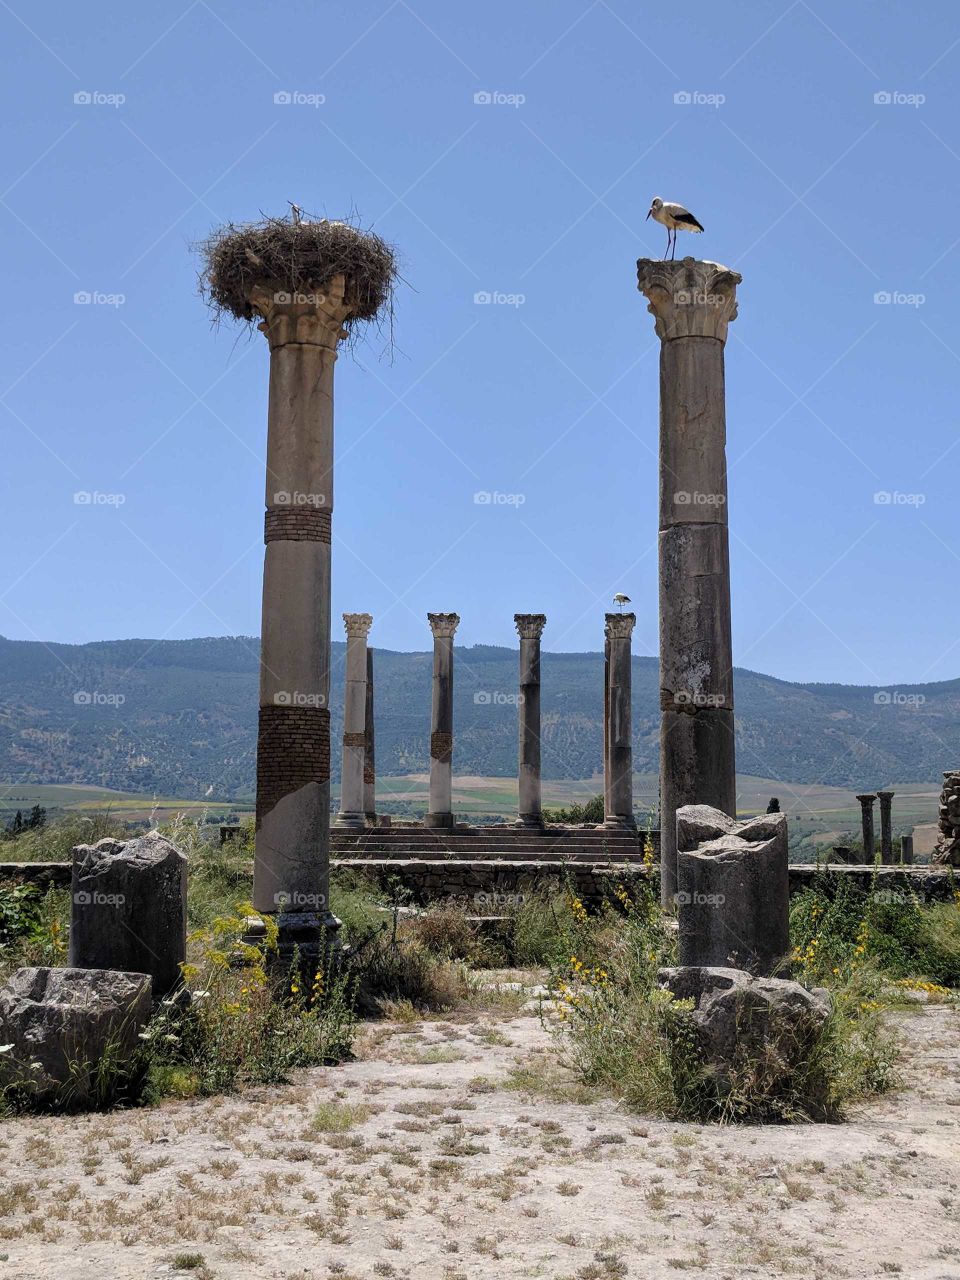 Broken and Freestanding Columns Framing Four Roman Columns with a Bird on One Column and Another Birds Nest on a Column at the Ancient Roman Ruins of Volulibis in Morocco